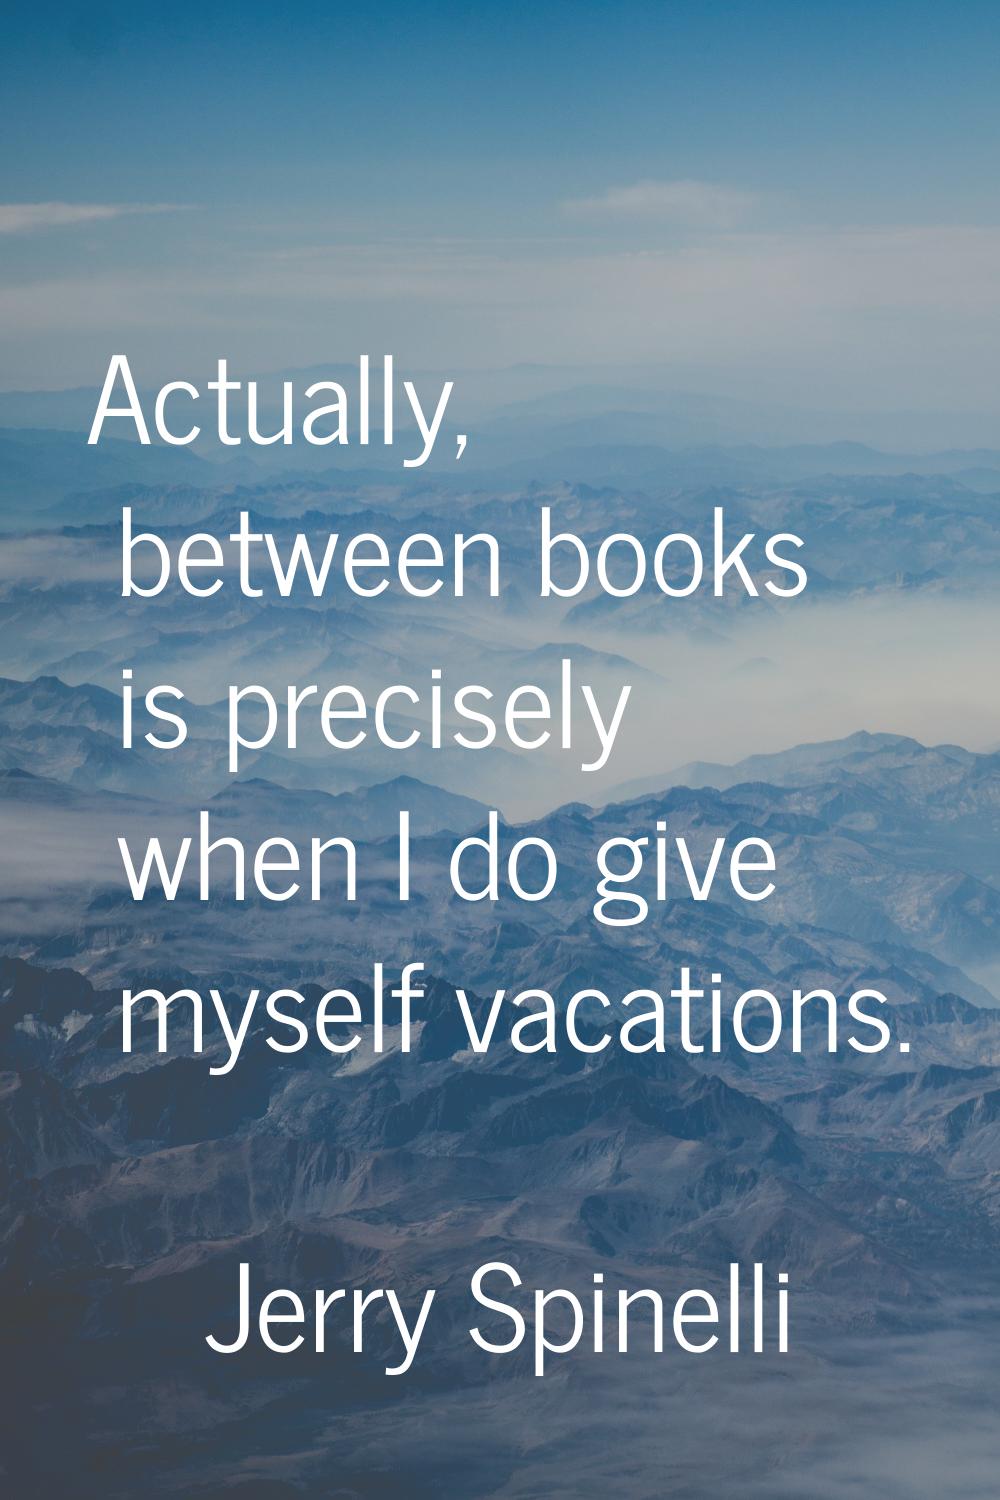 Actually, between books is precisely when I do give myself vacations.